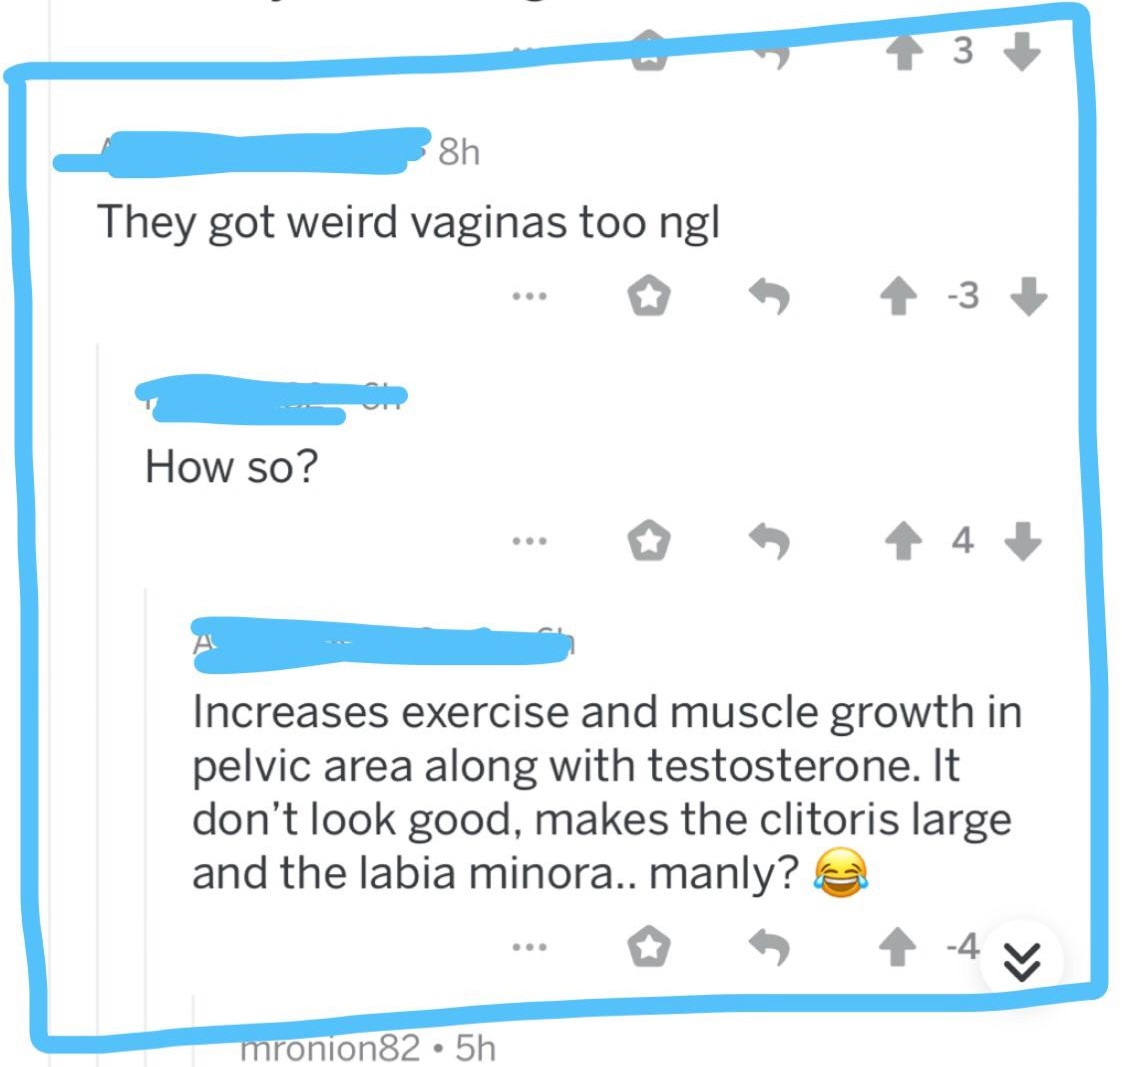 diagram - 3 8h They got weird vaginas too ng| How so? ... 14 Increases exercise and muscle growth in pelvic area along with testosterone. It don't look good, makes the clitoris large and the labia minora.. manly? mronion82 5h